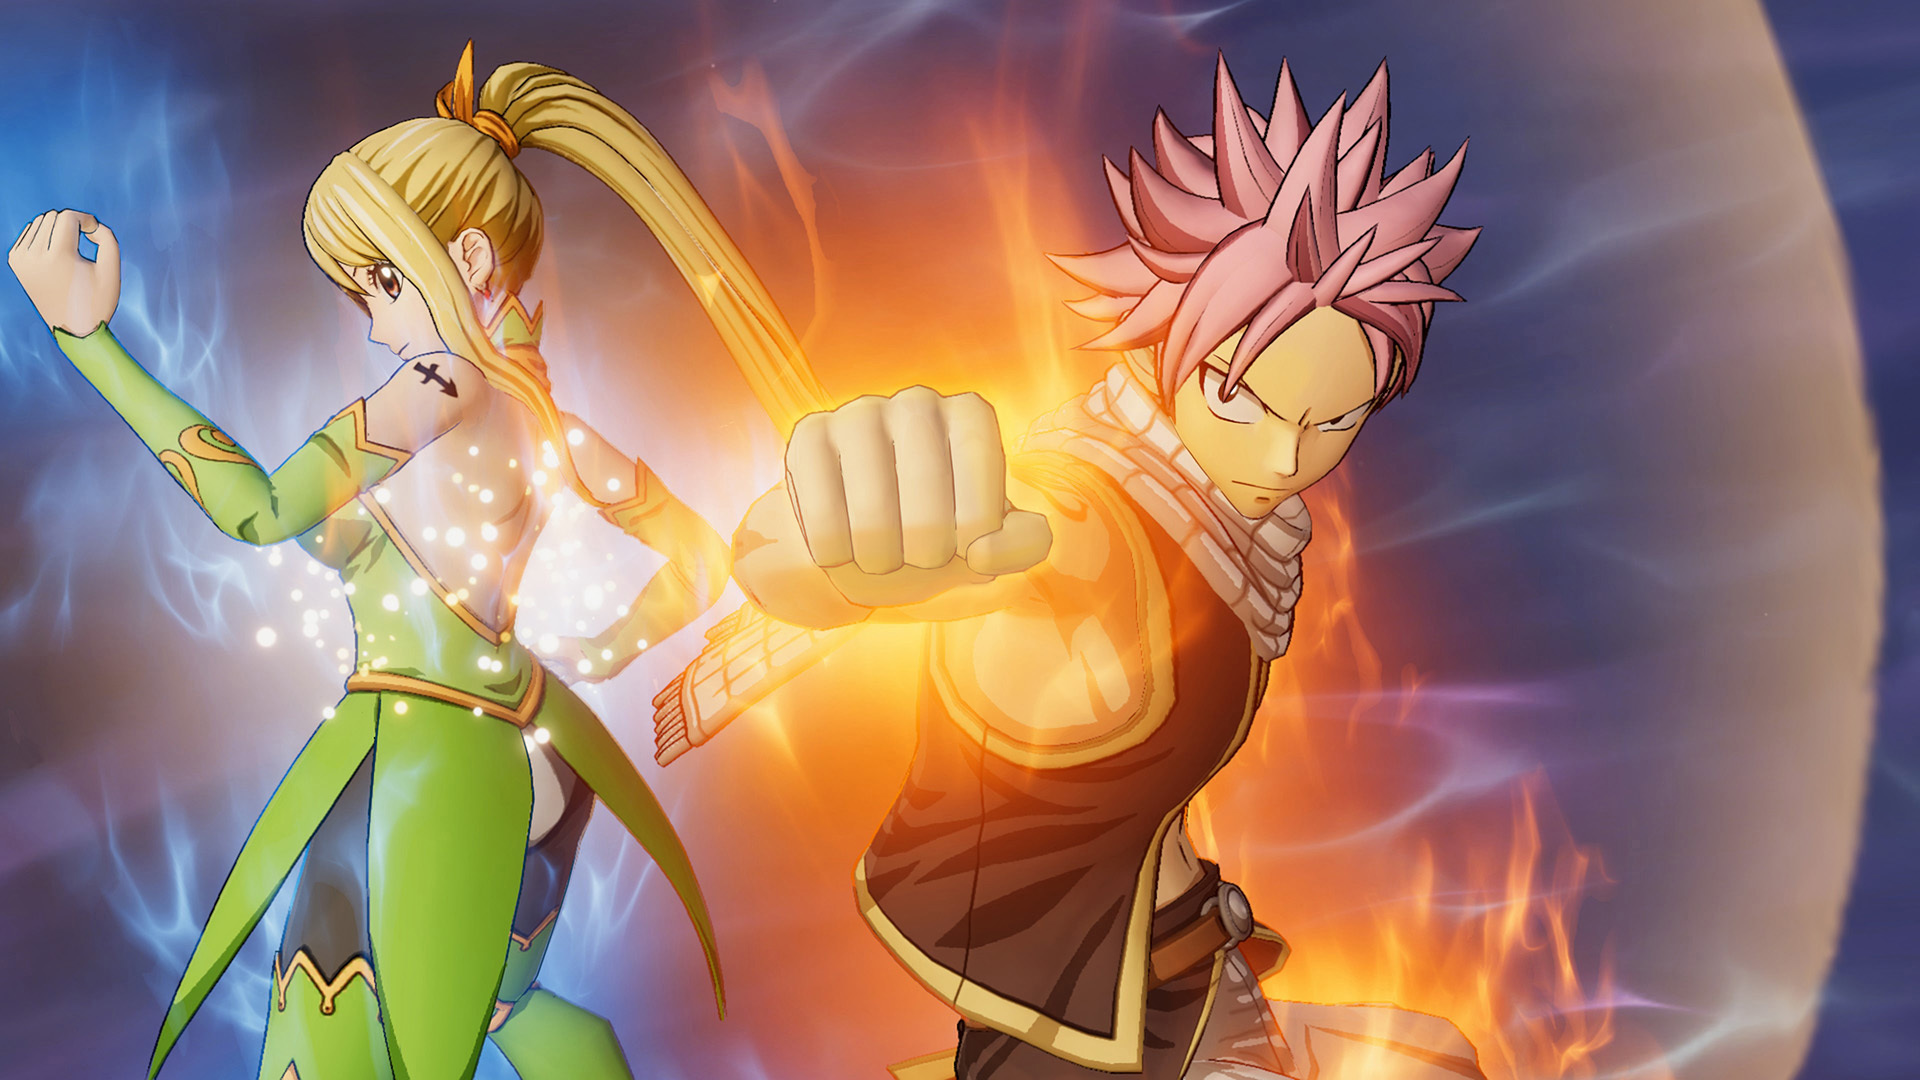 Fairy Tail Introducing Powerful New Magic To Spellbind Anime Fans And Gamers Alike Actualites Steam